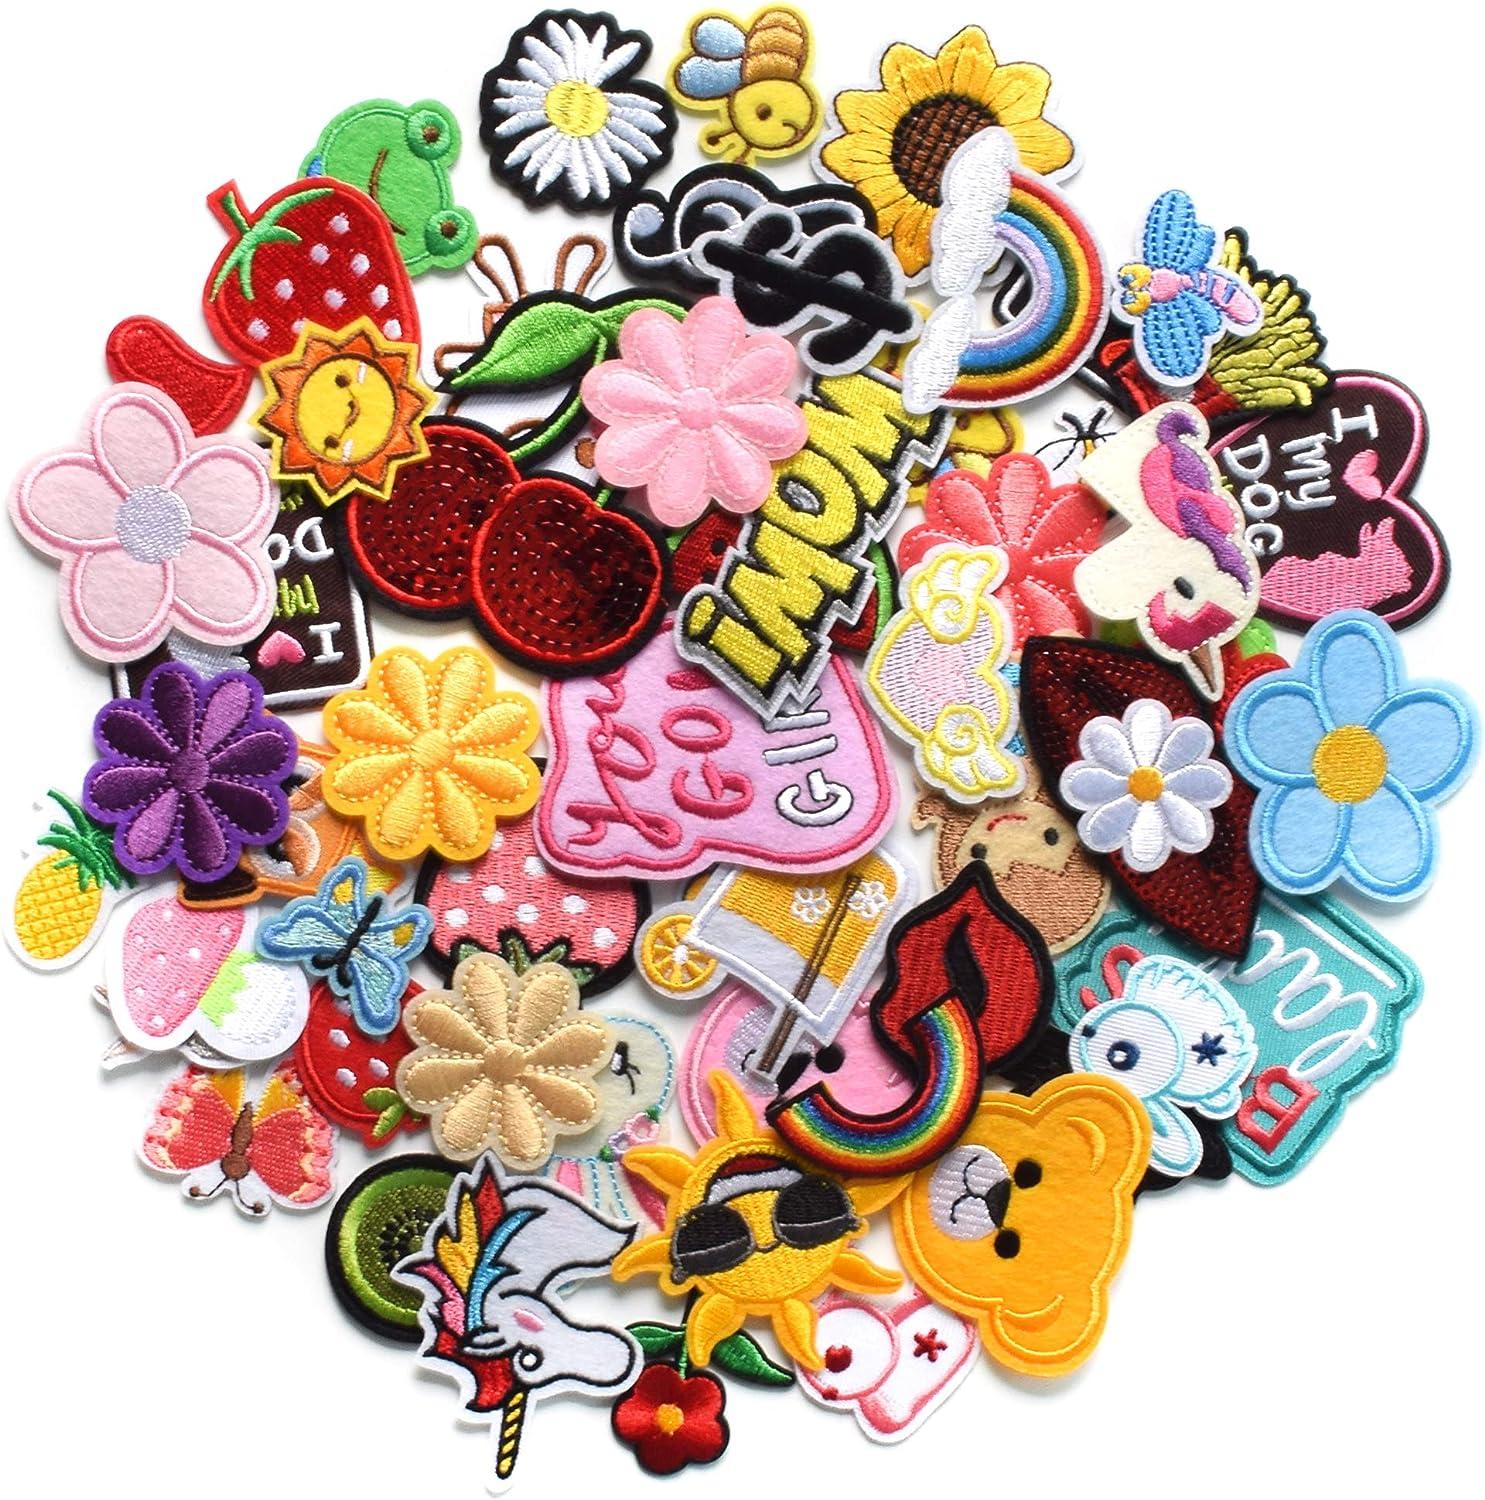 Flower Patches Set Iron On Applique Stickers For Clothing, Bags